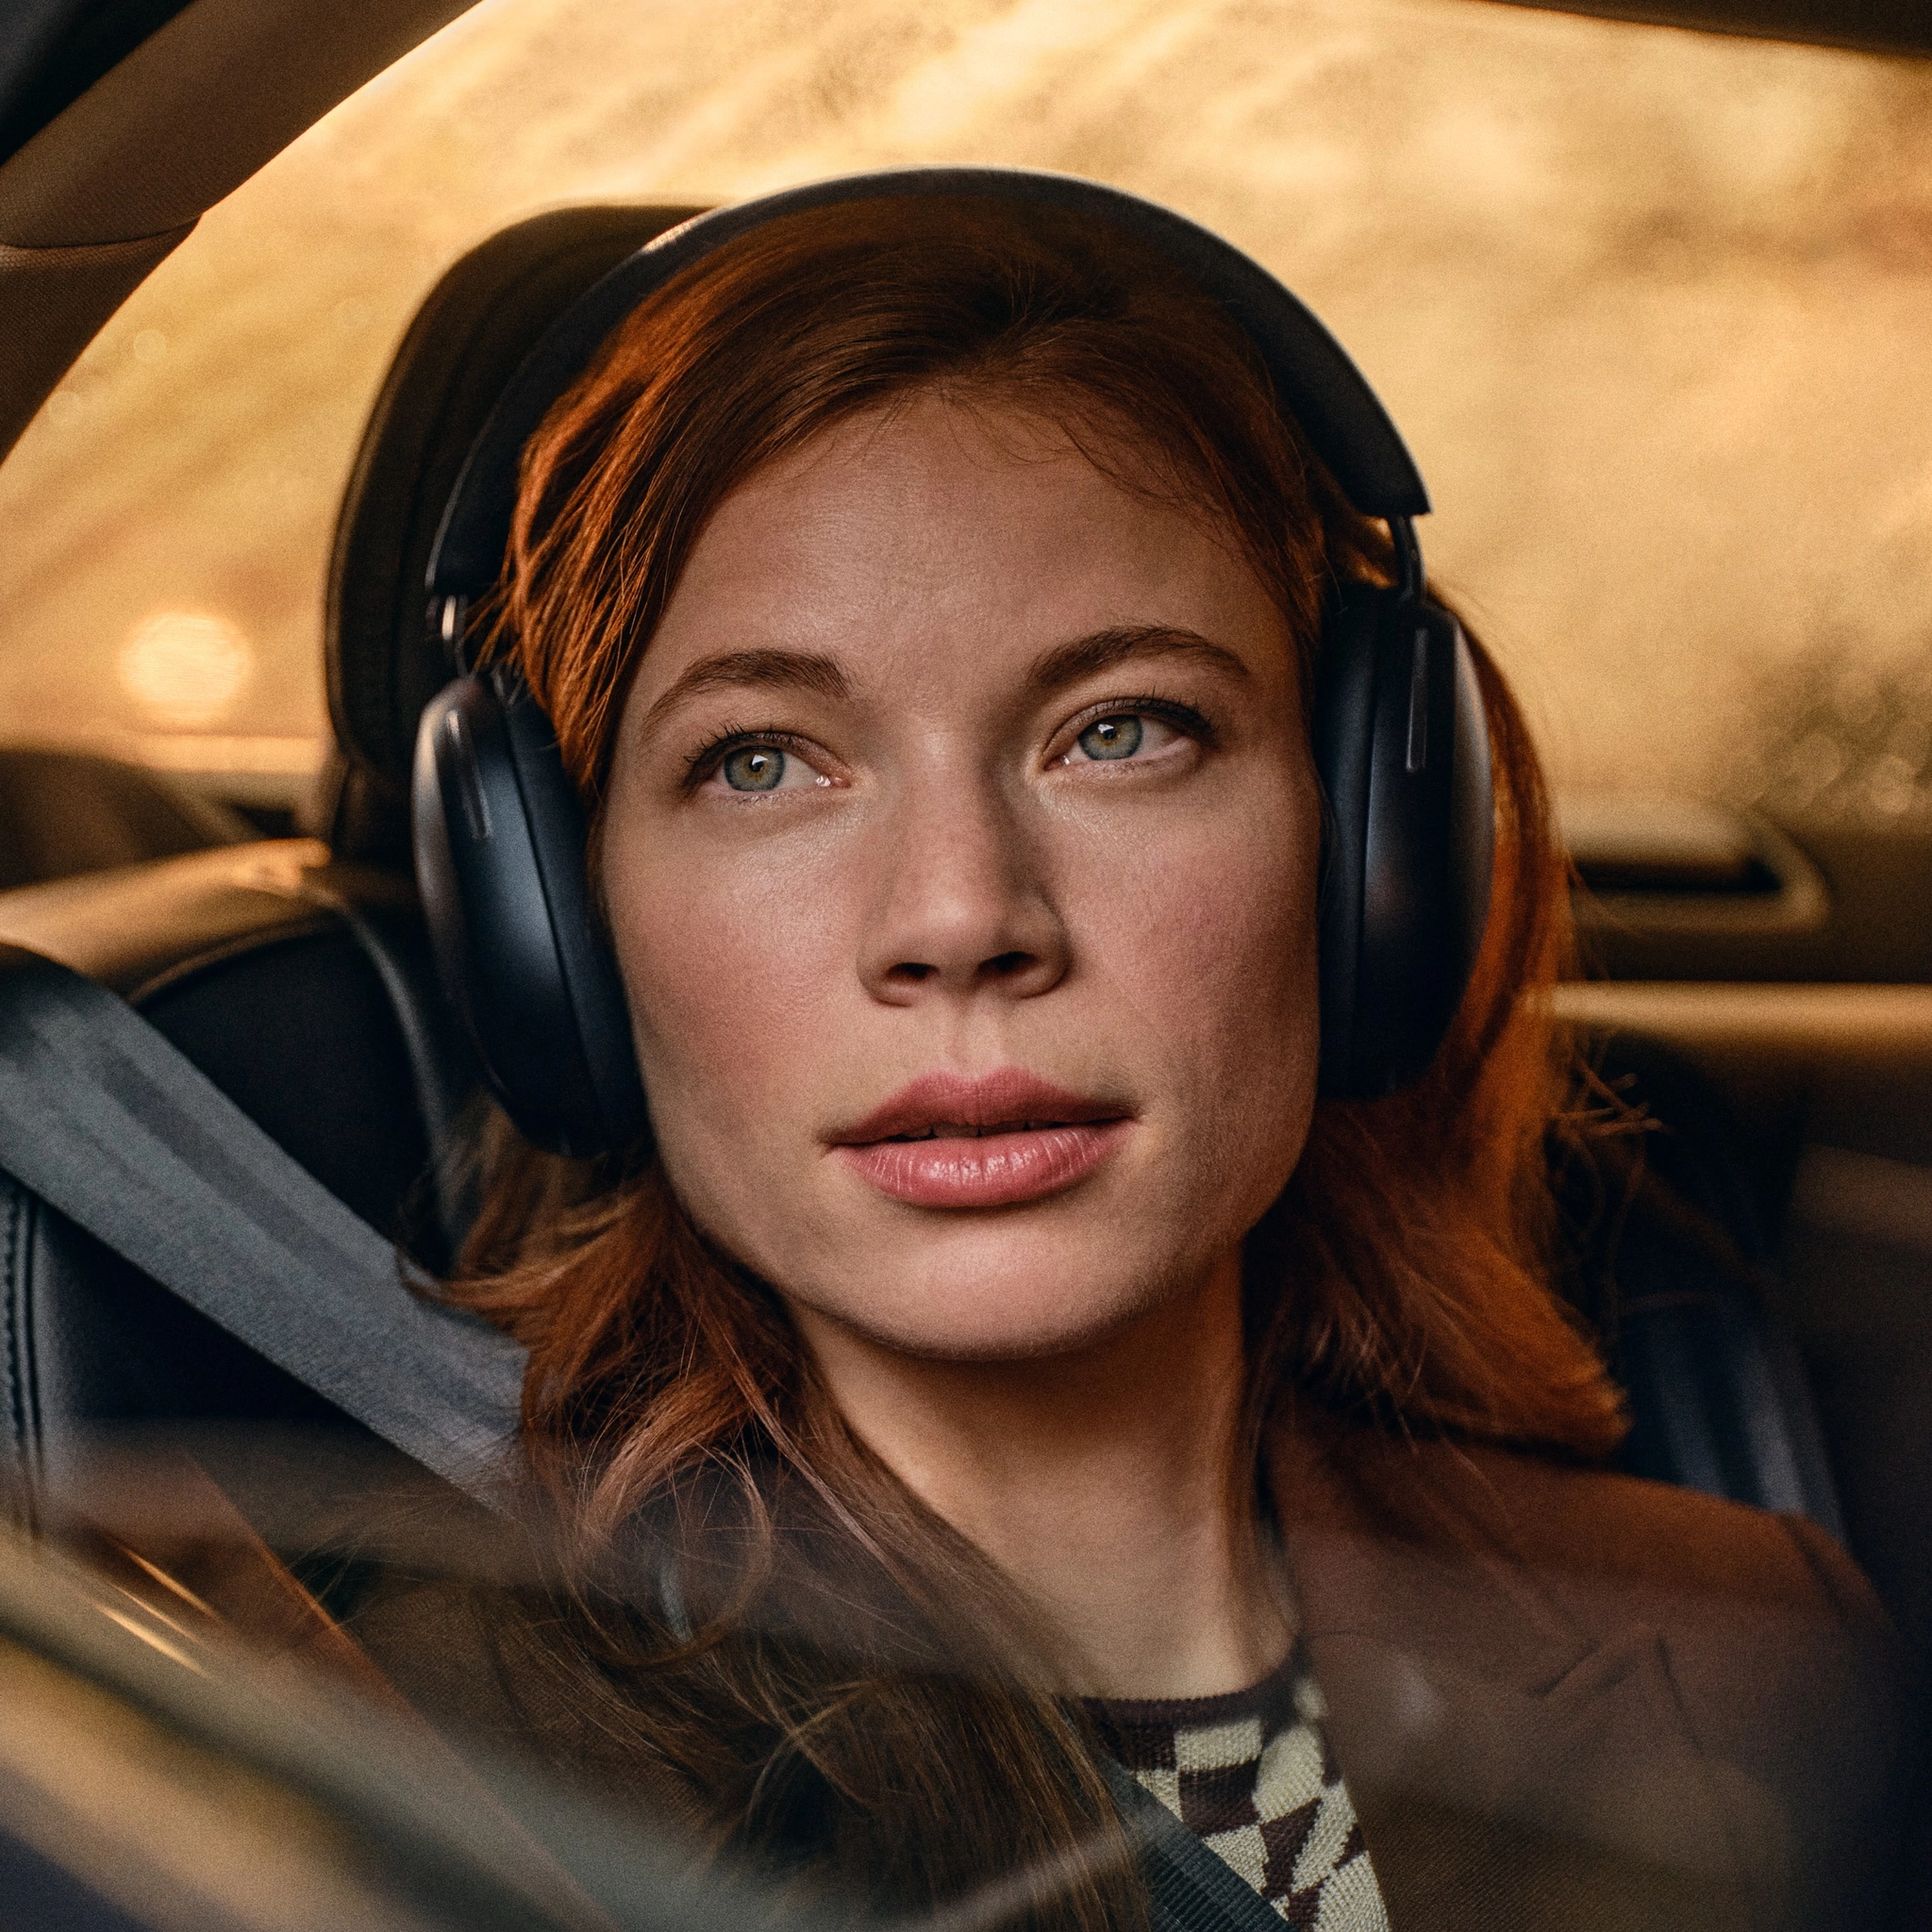 Sonos Ace Headphones - A Woman With Red Hair Wearing New Sonos Ace Headphones Sits In A Car Seat, Looking Out The Window.